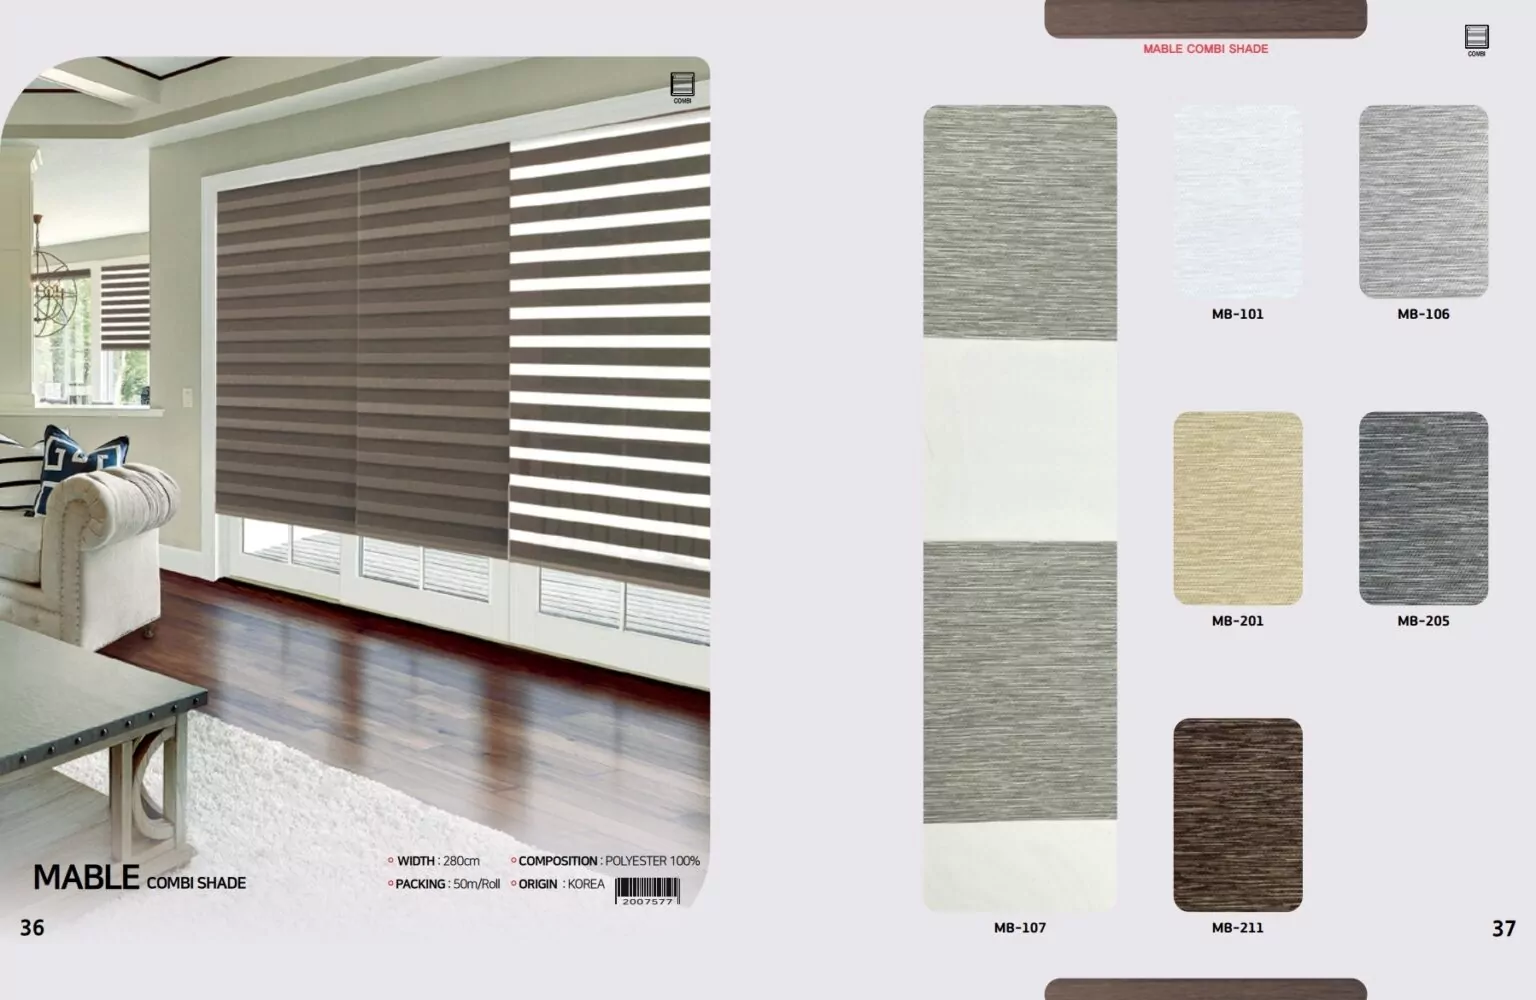 Rayblinds JDX-ebook_MABLE-1536x1000-1 Catalog 